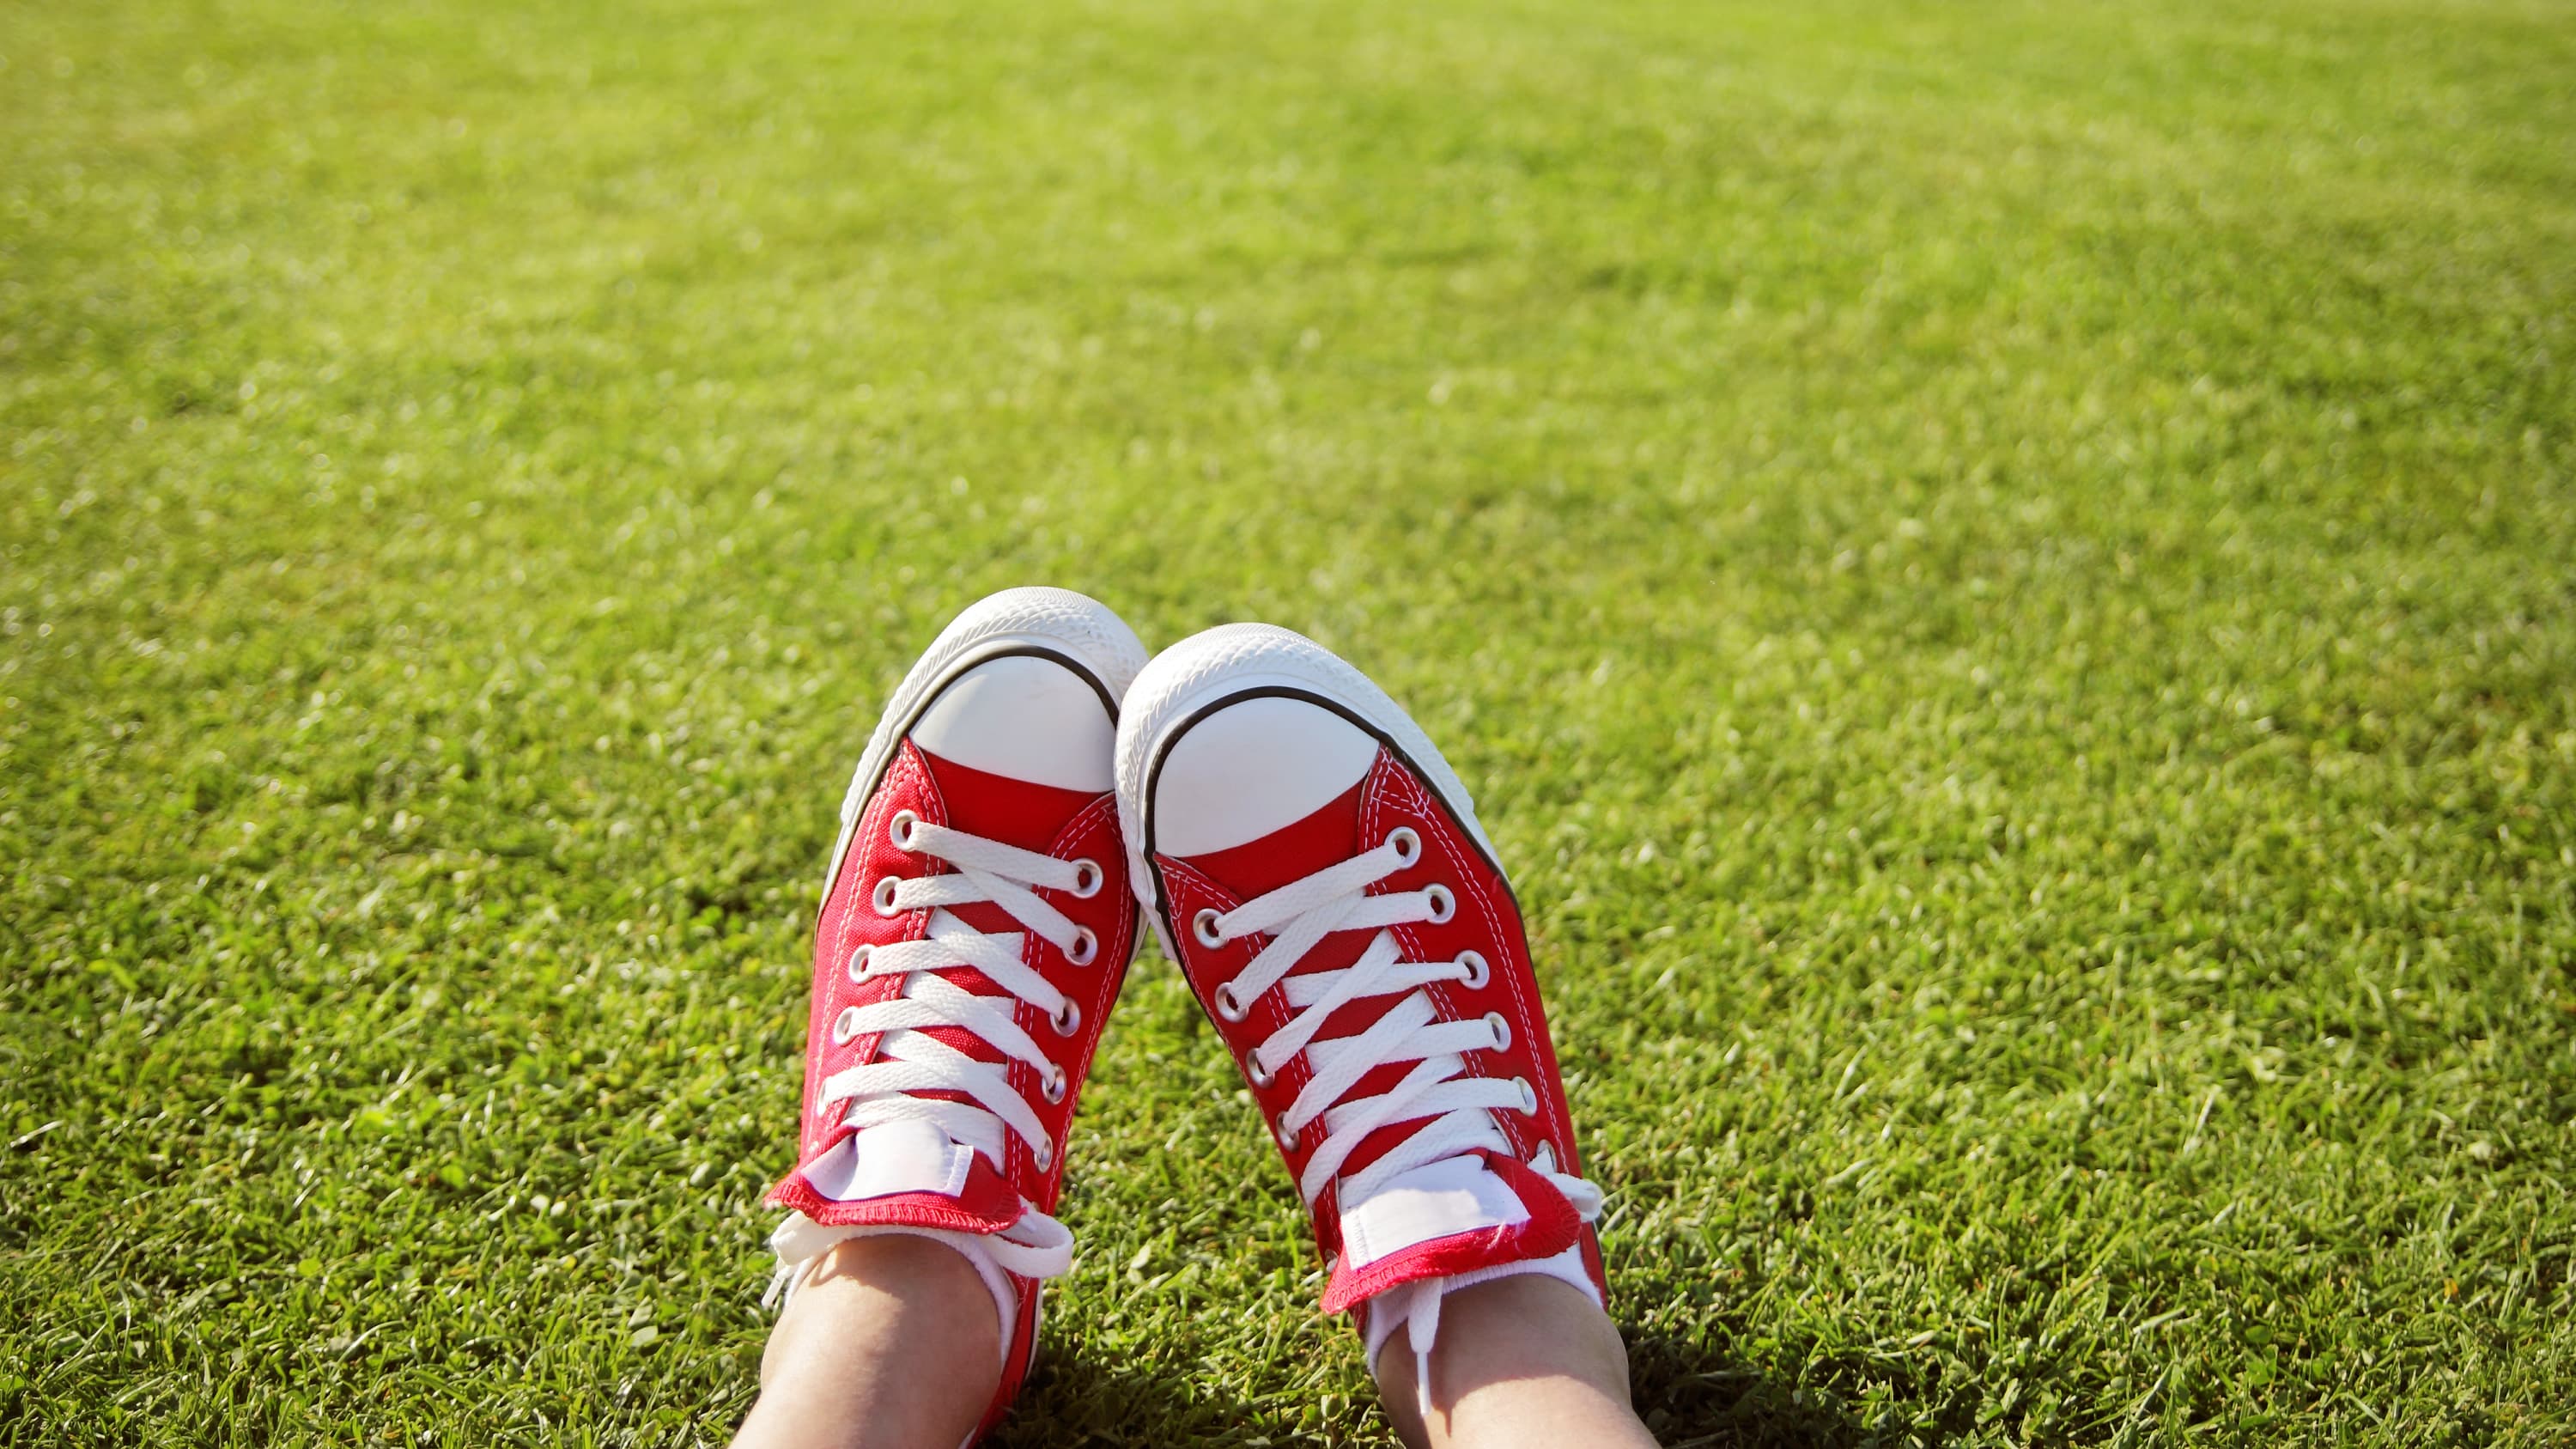 a closeup of the feet (wearing sneakers) of a person, who has a limb leg discrepancy, sitting on the grass.